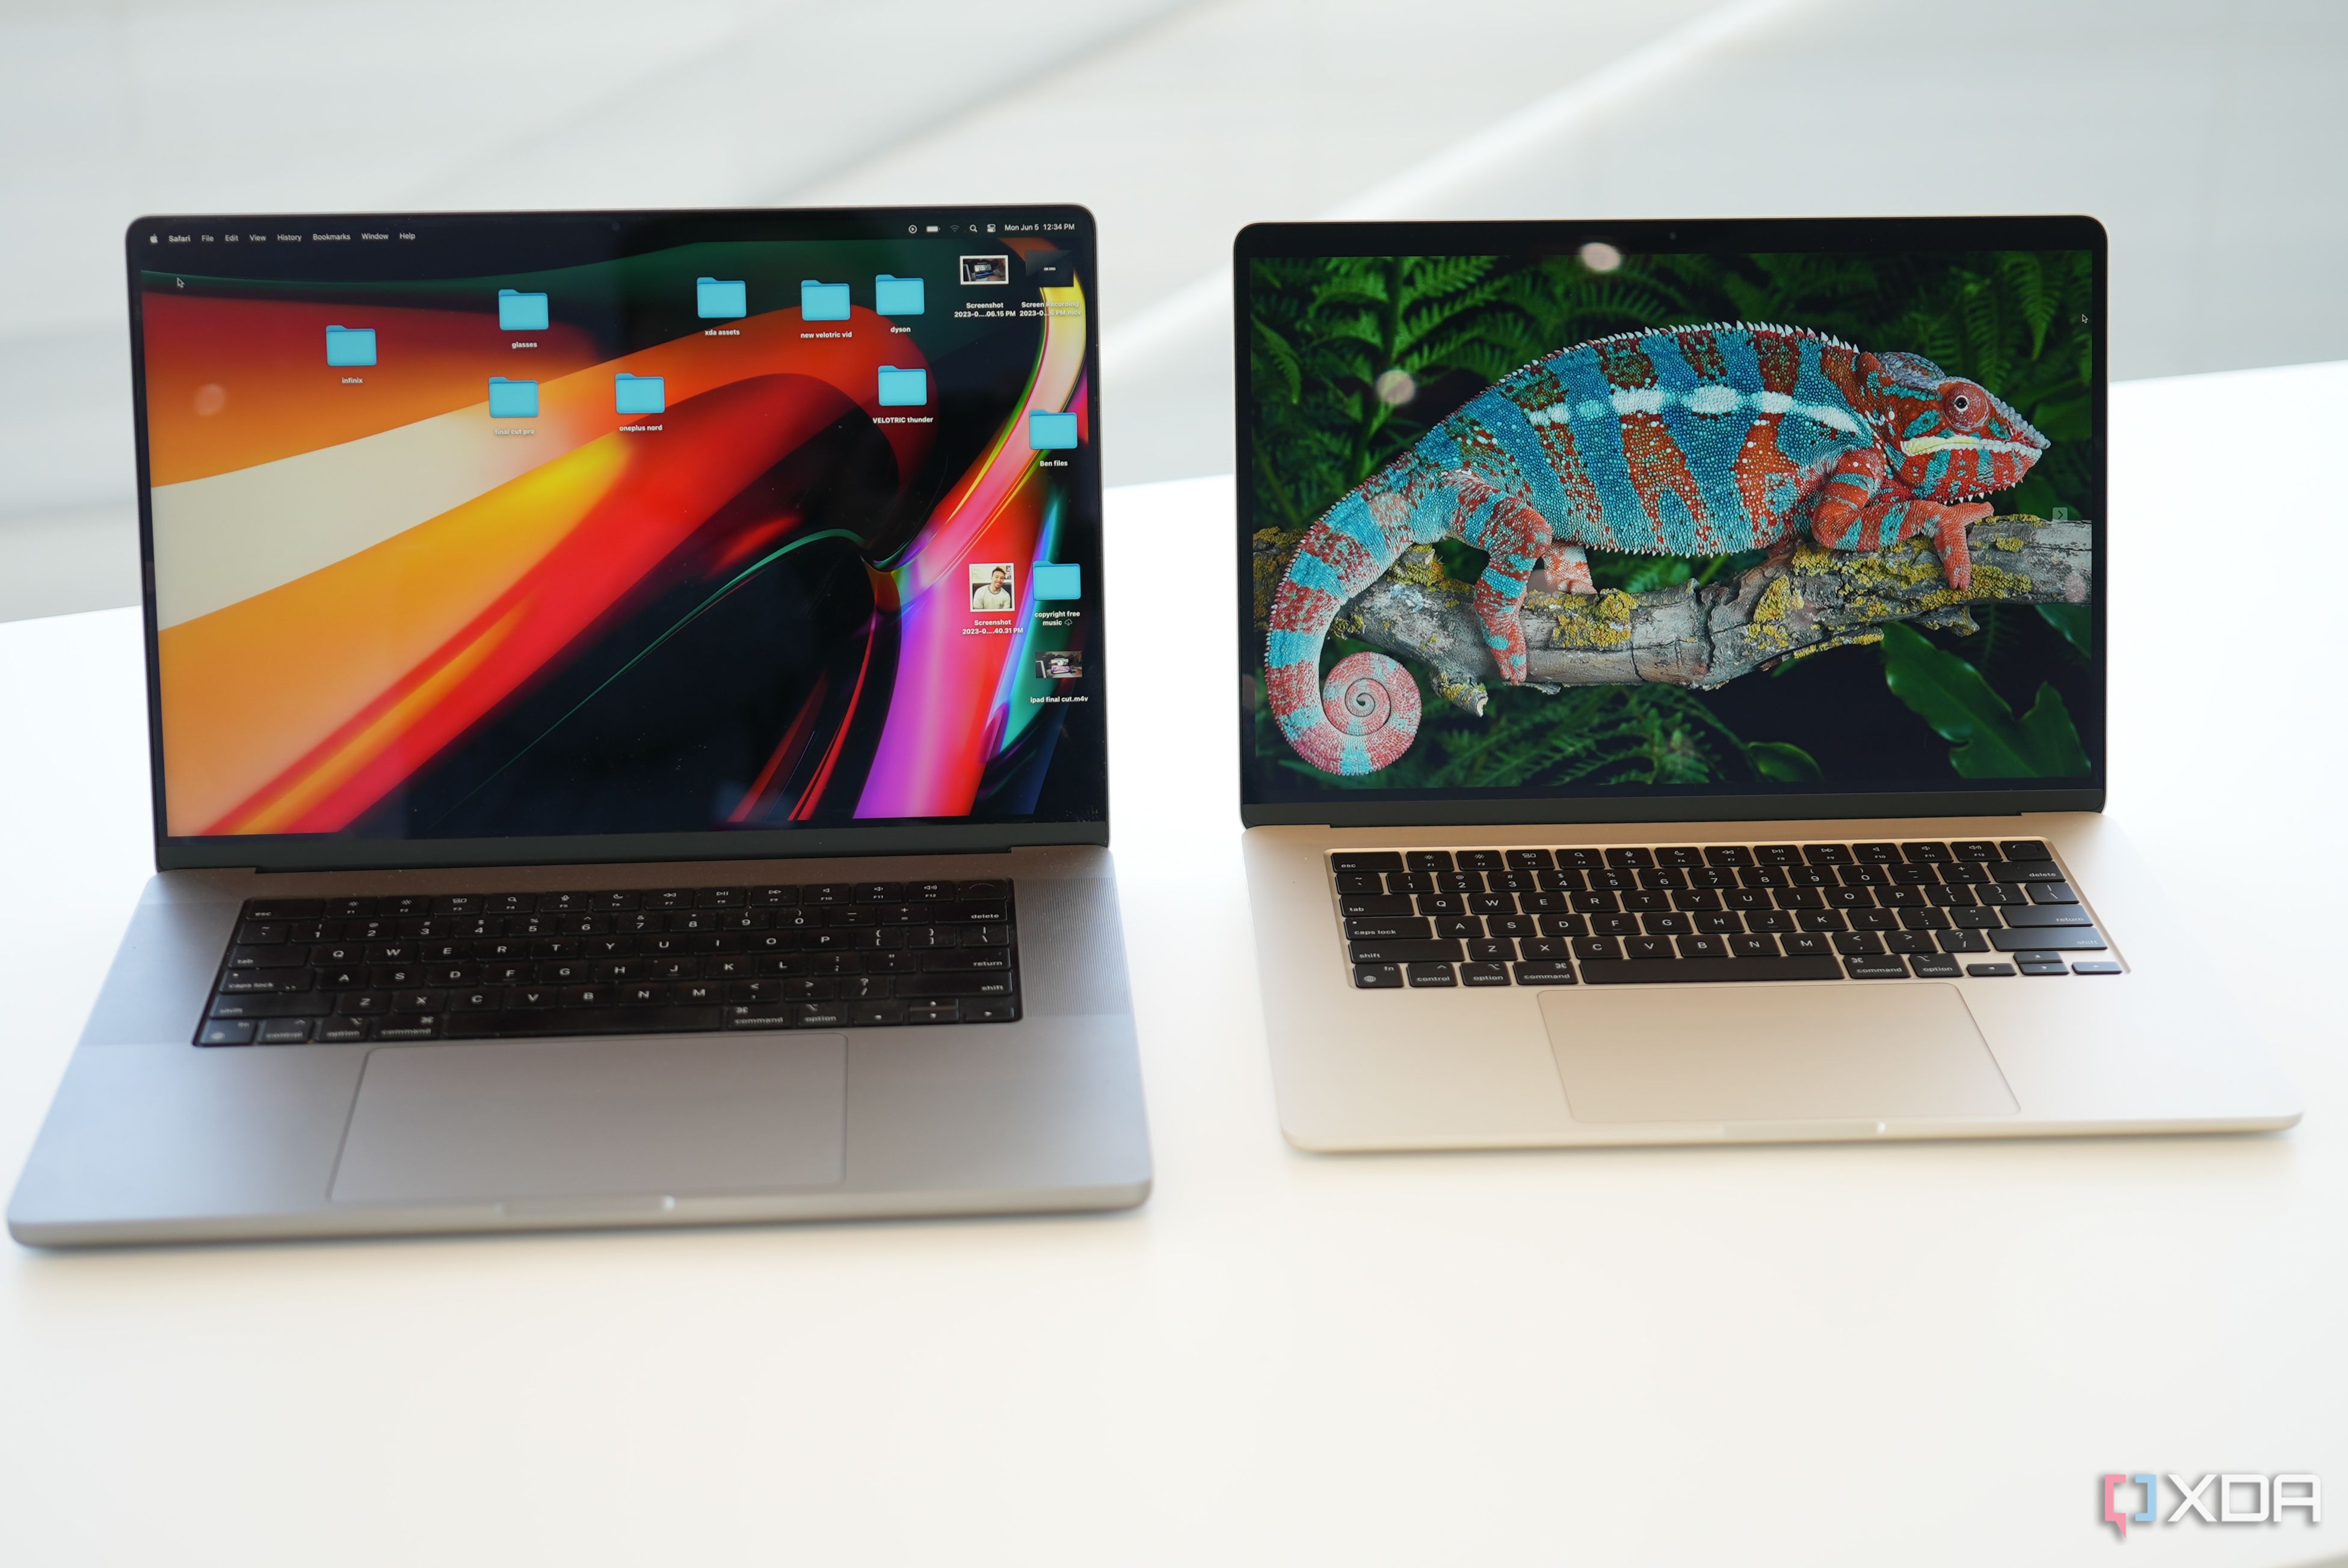 What's the difference between the MacBook Pro and MacBook Air?